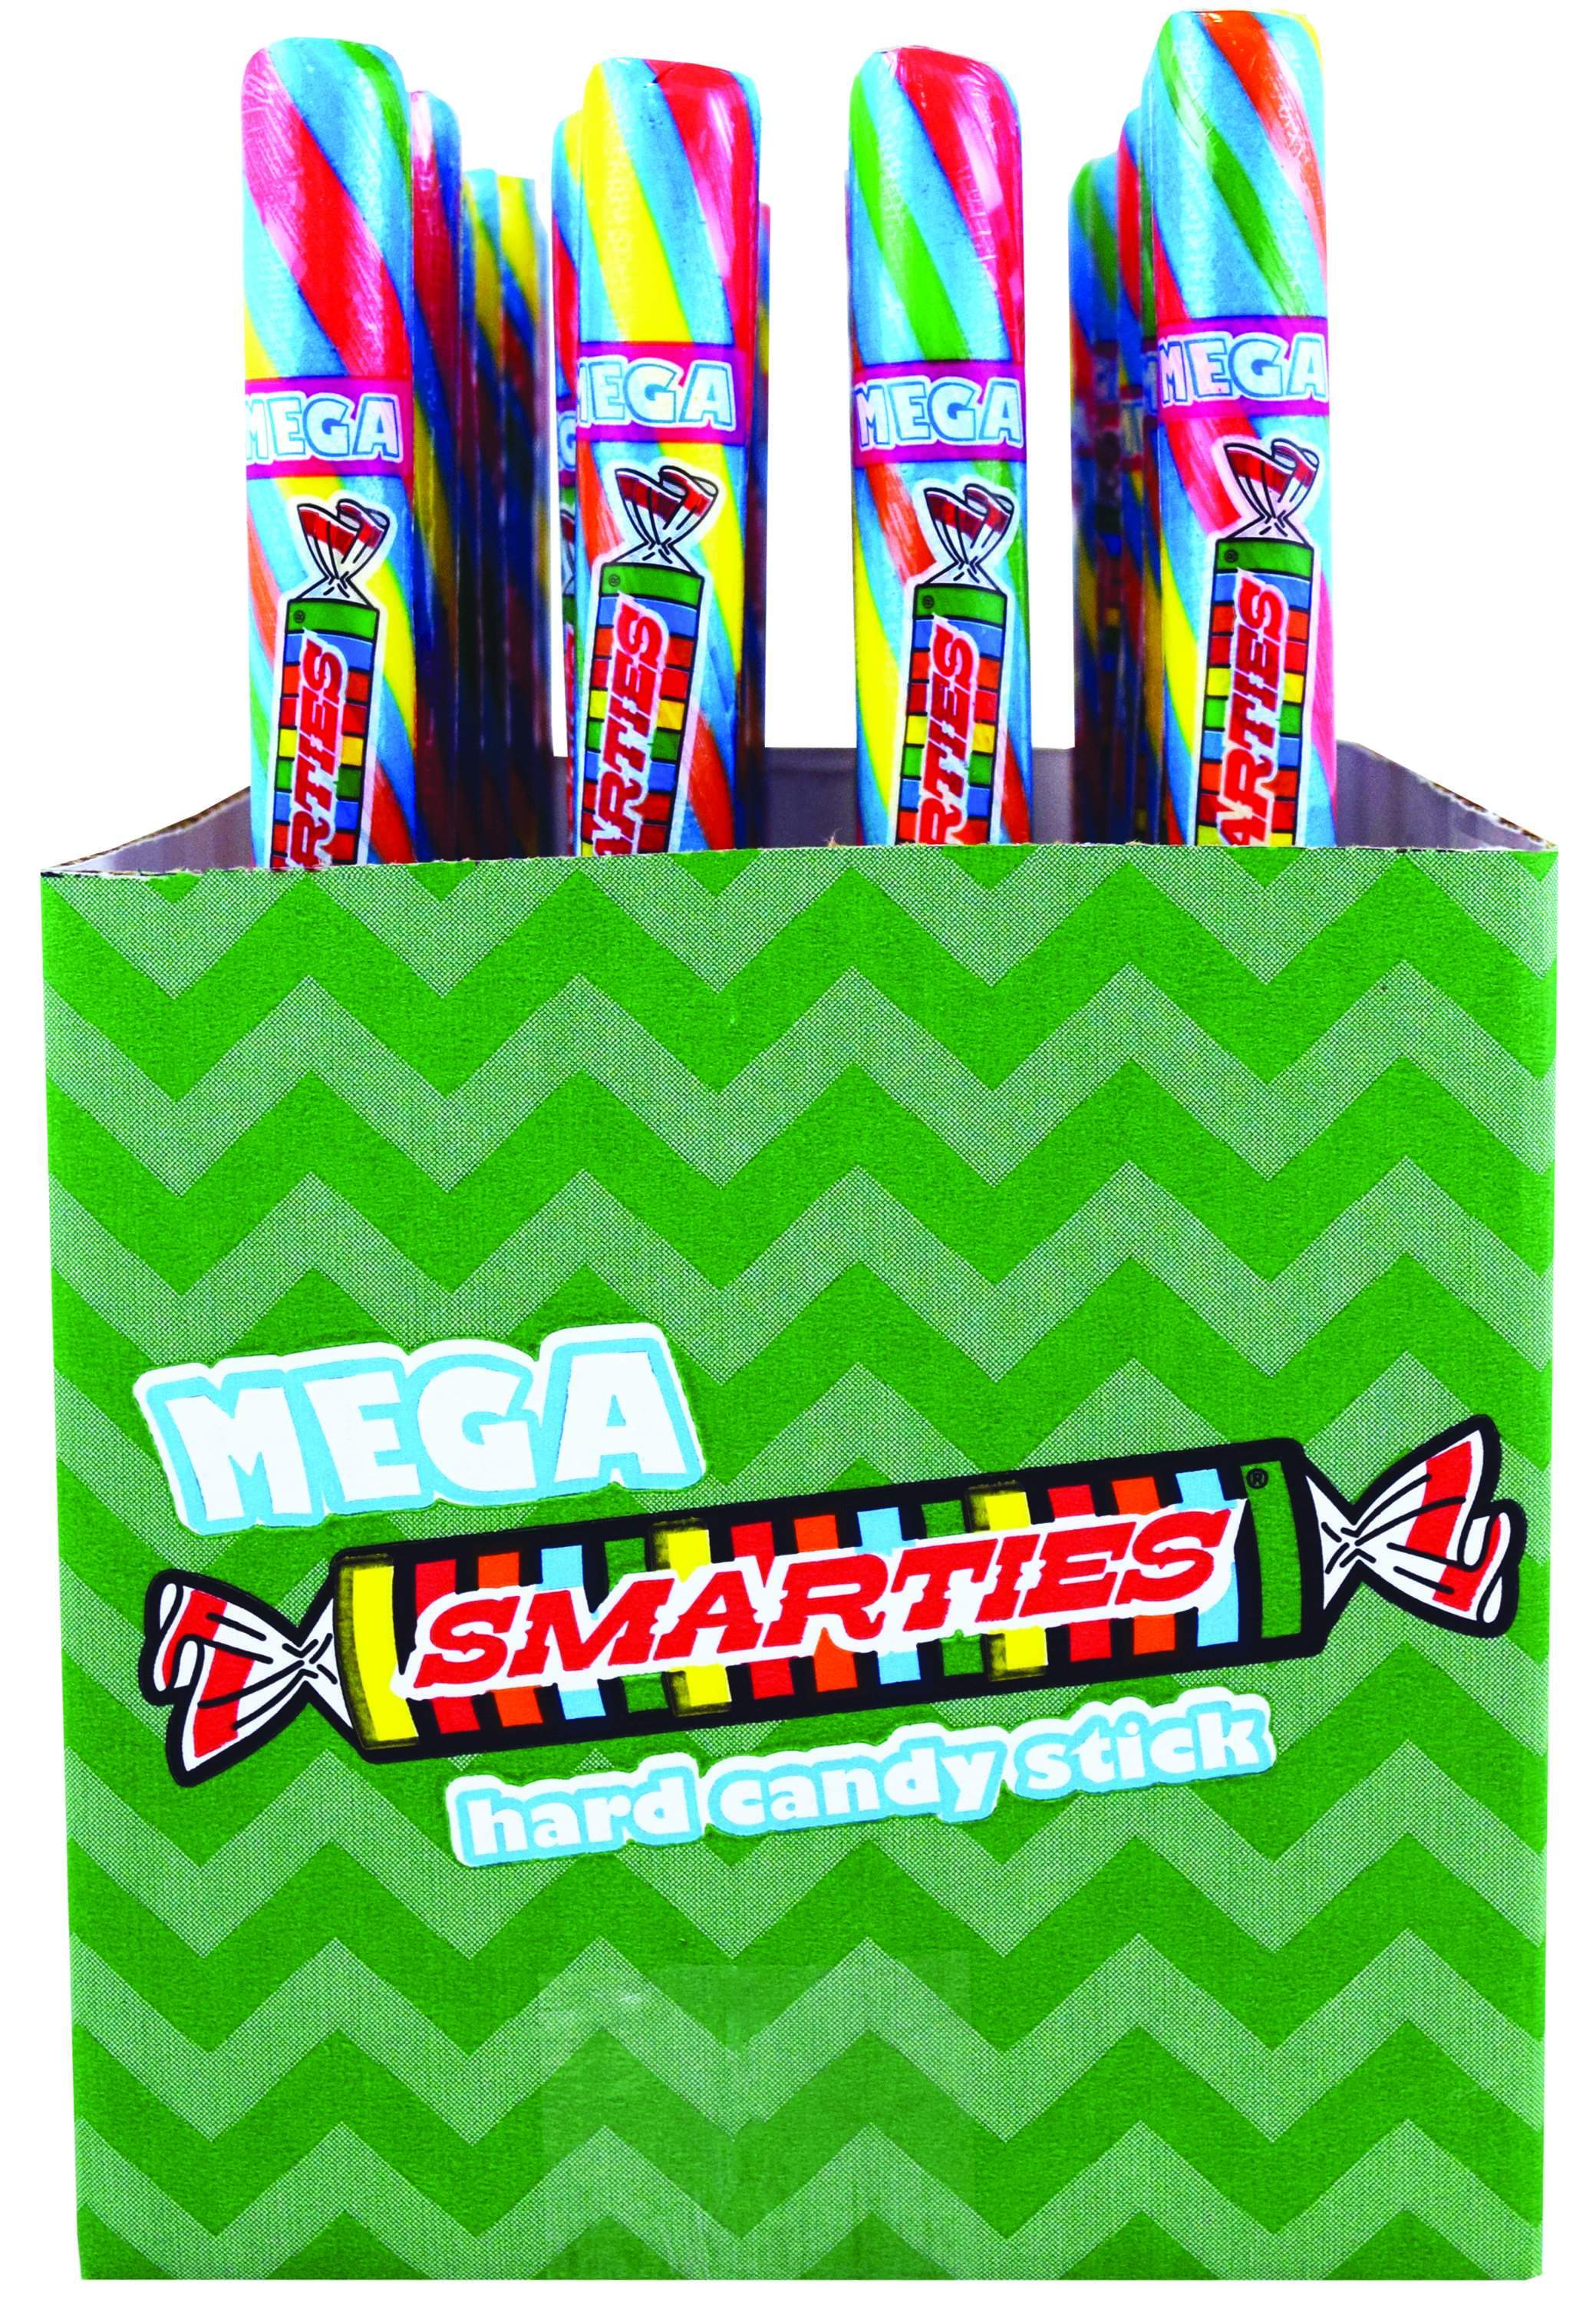 Flavored Candy Canes Spangler Smarties Jumbo 3.5 Oz-24 Count 